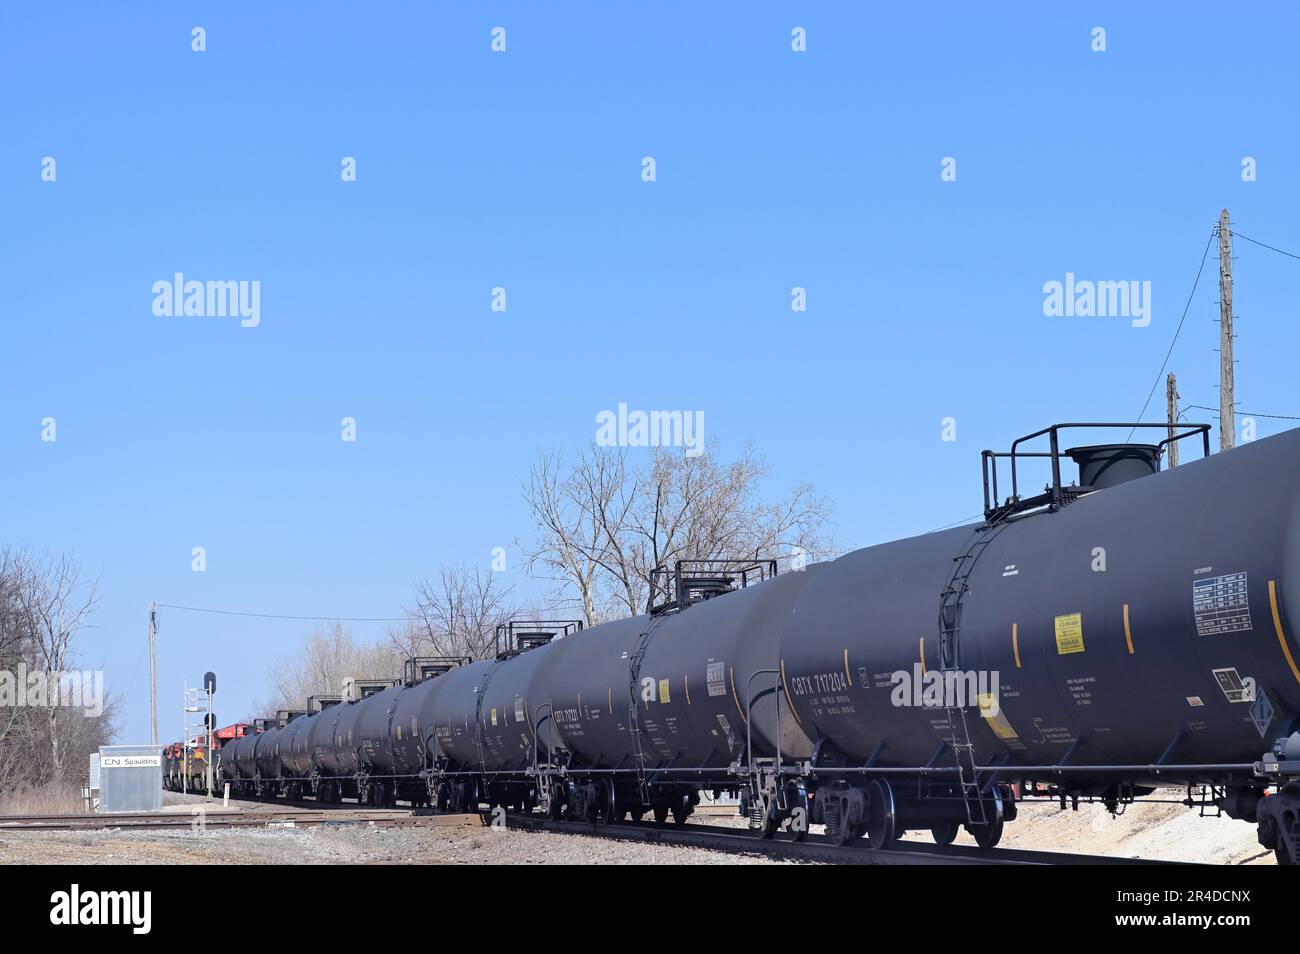 Elgin, Illinois, USA. A long string of tank cars in a freight train passing through northeastern Illinois. Stock Photo